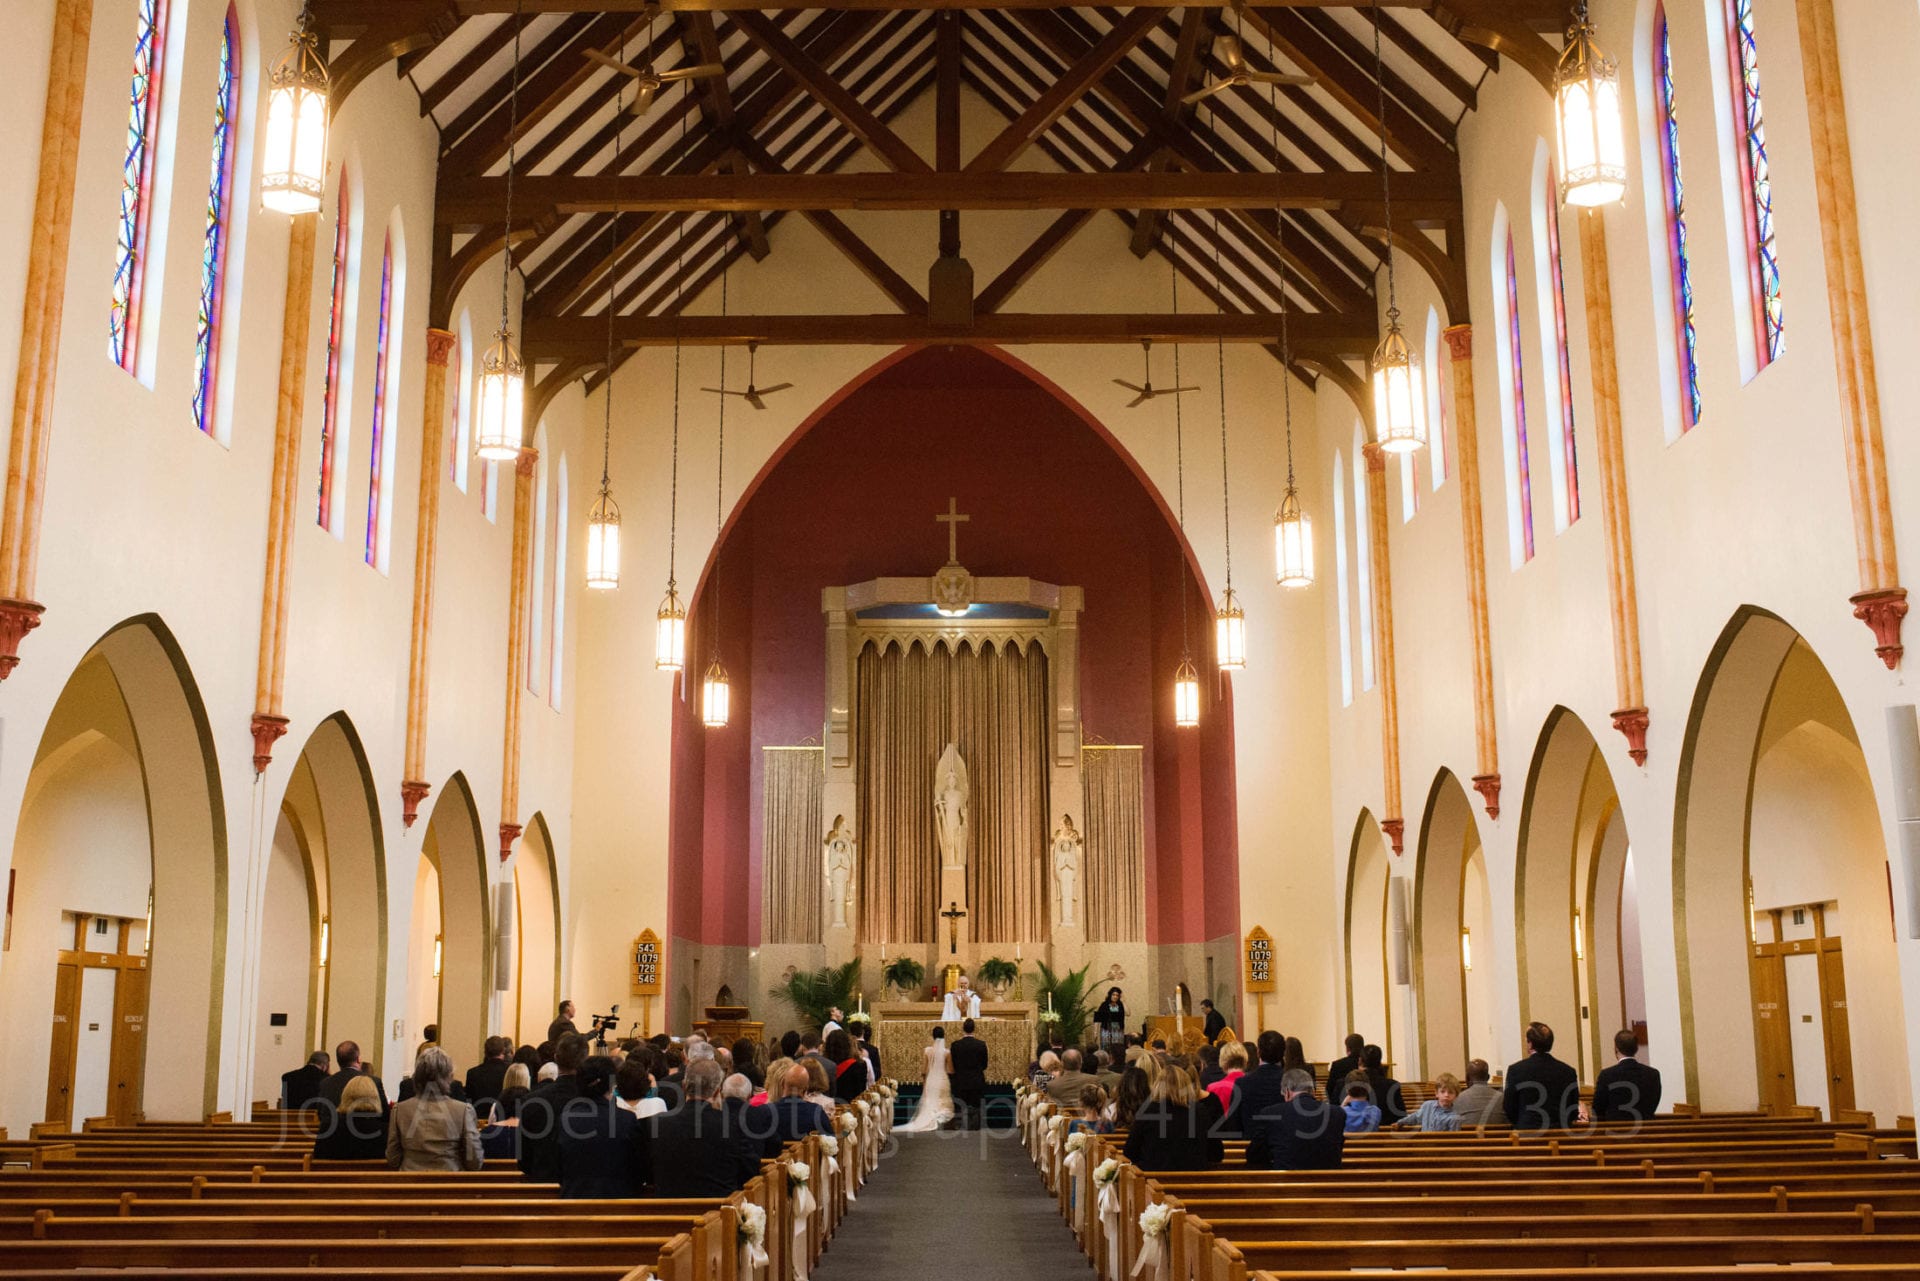 the interior of a catholic church during a wedding. the walls of the church are white while the area behind the altar is red. There are wooden beams exposed on the ceiling.